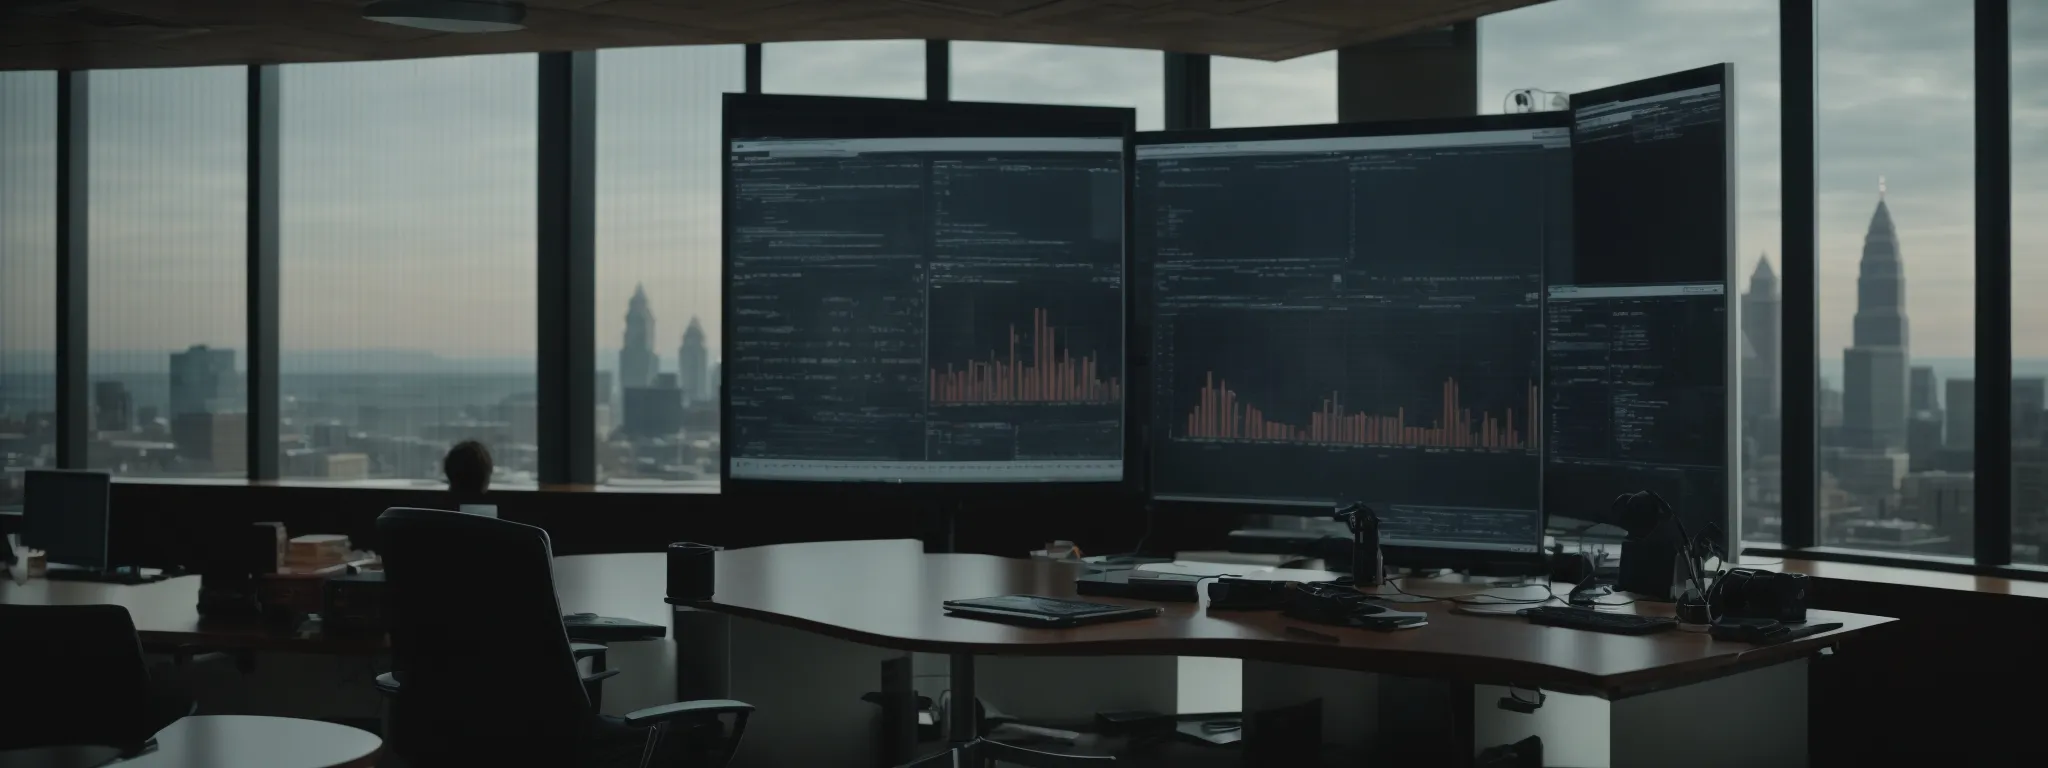 a person analyzing complex digital analytics on a large computer screen in a modern office overlooking the cleveland skyline.